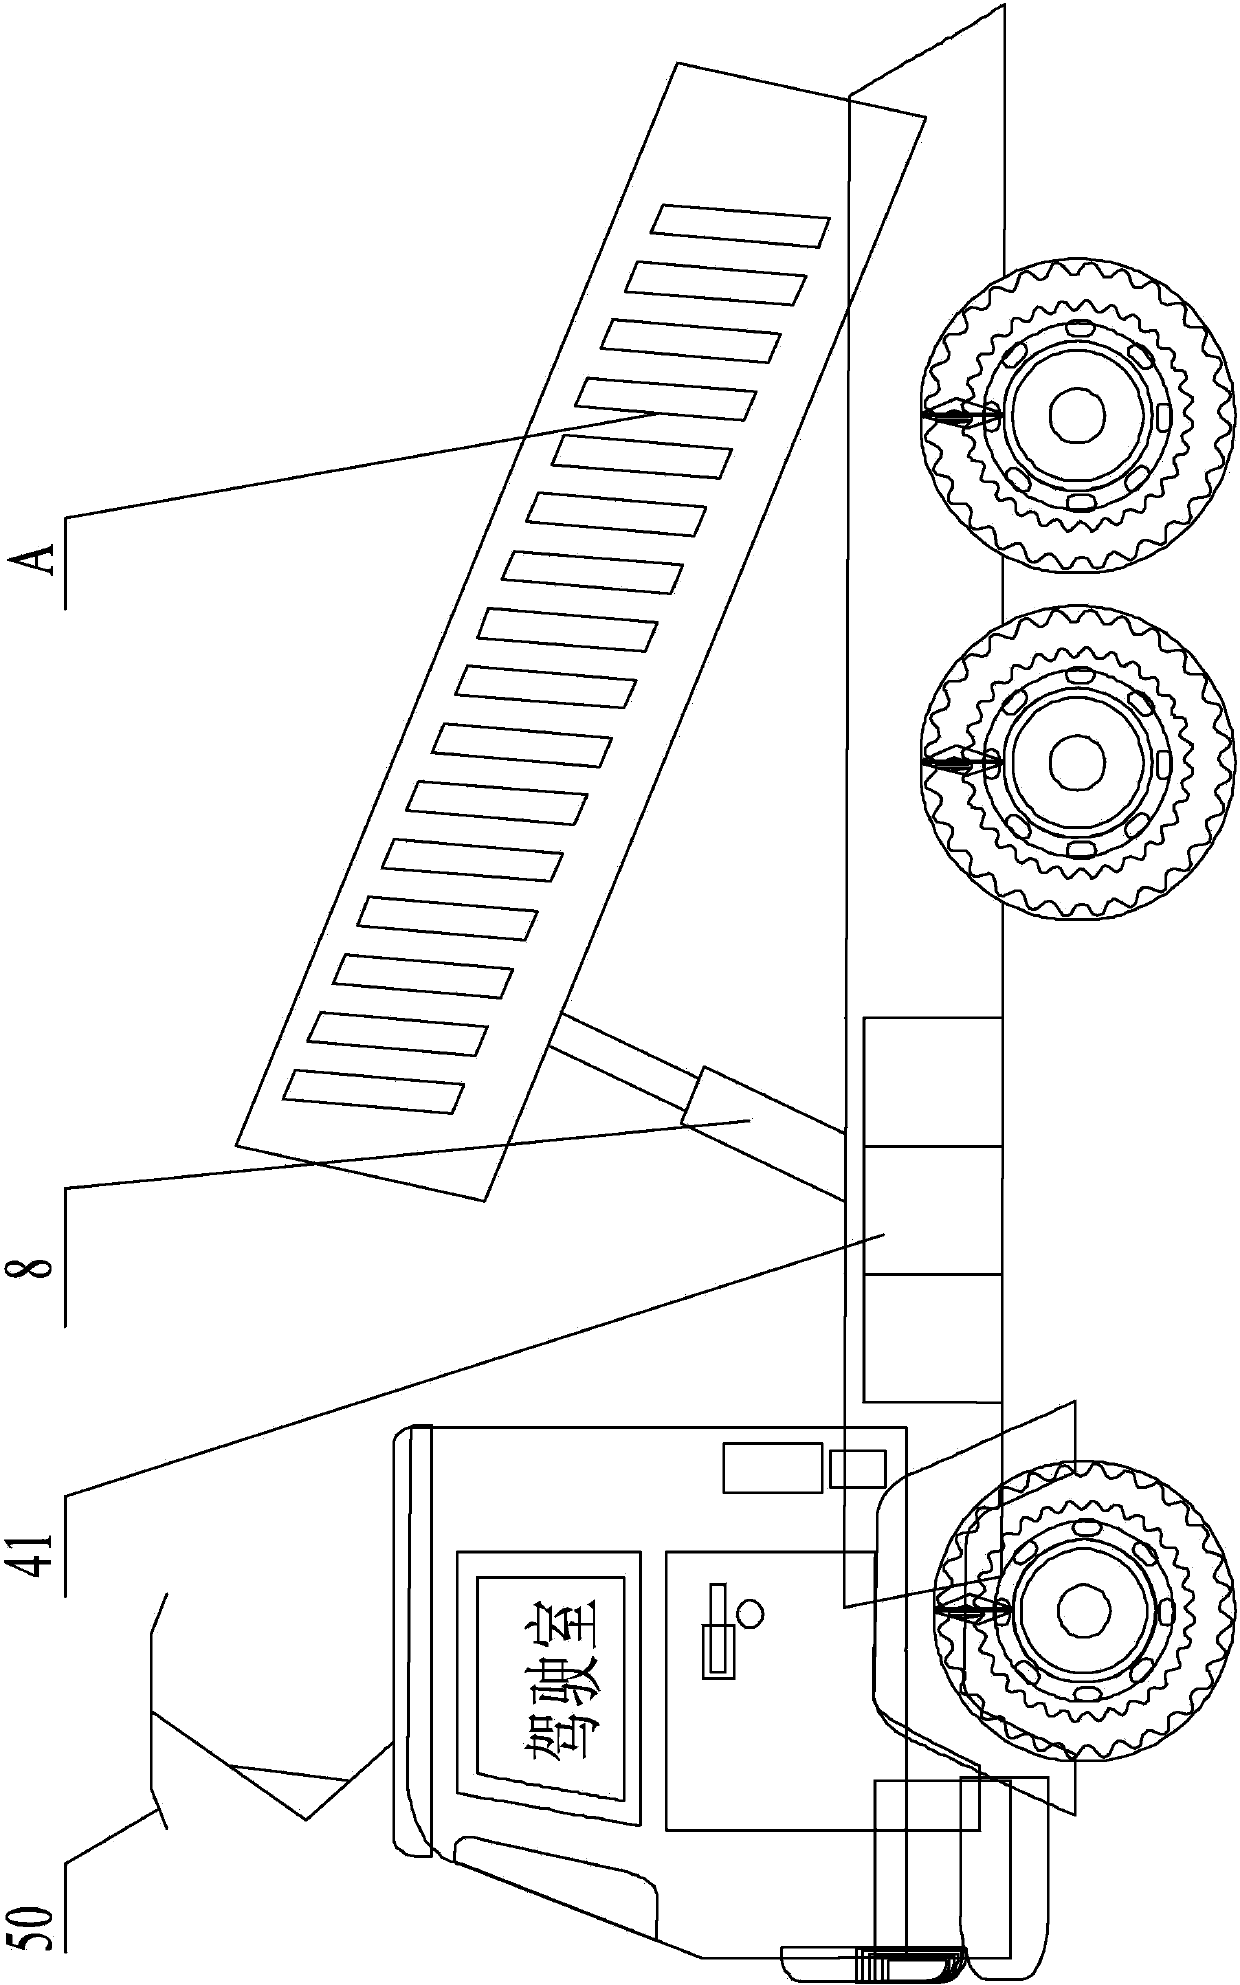 Electrically-driven mining truck